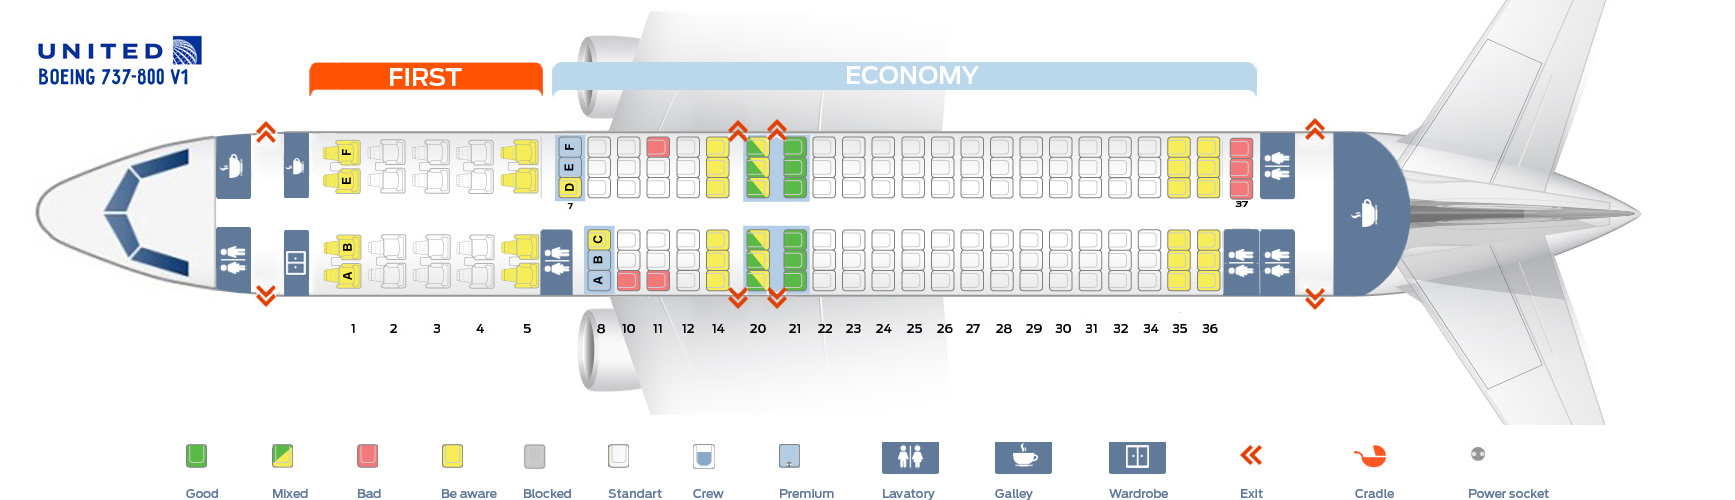 Seat_map_United_Airlines_Boeing_737_800_v1